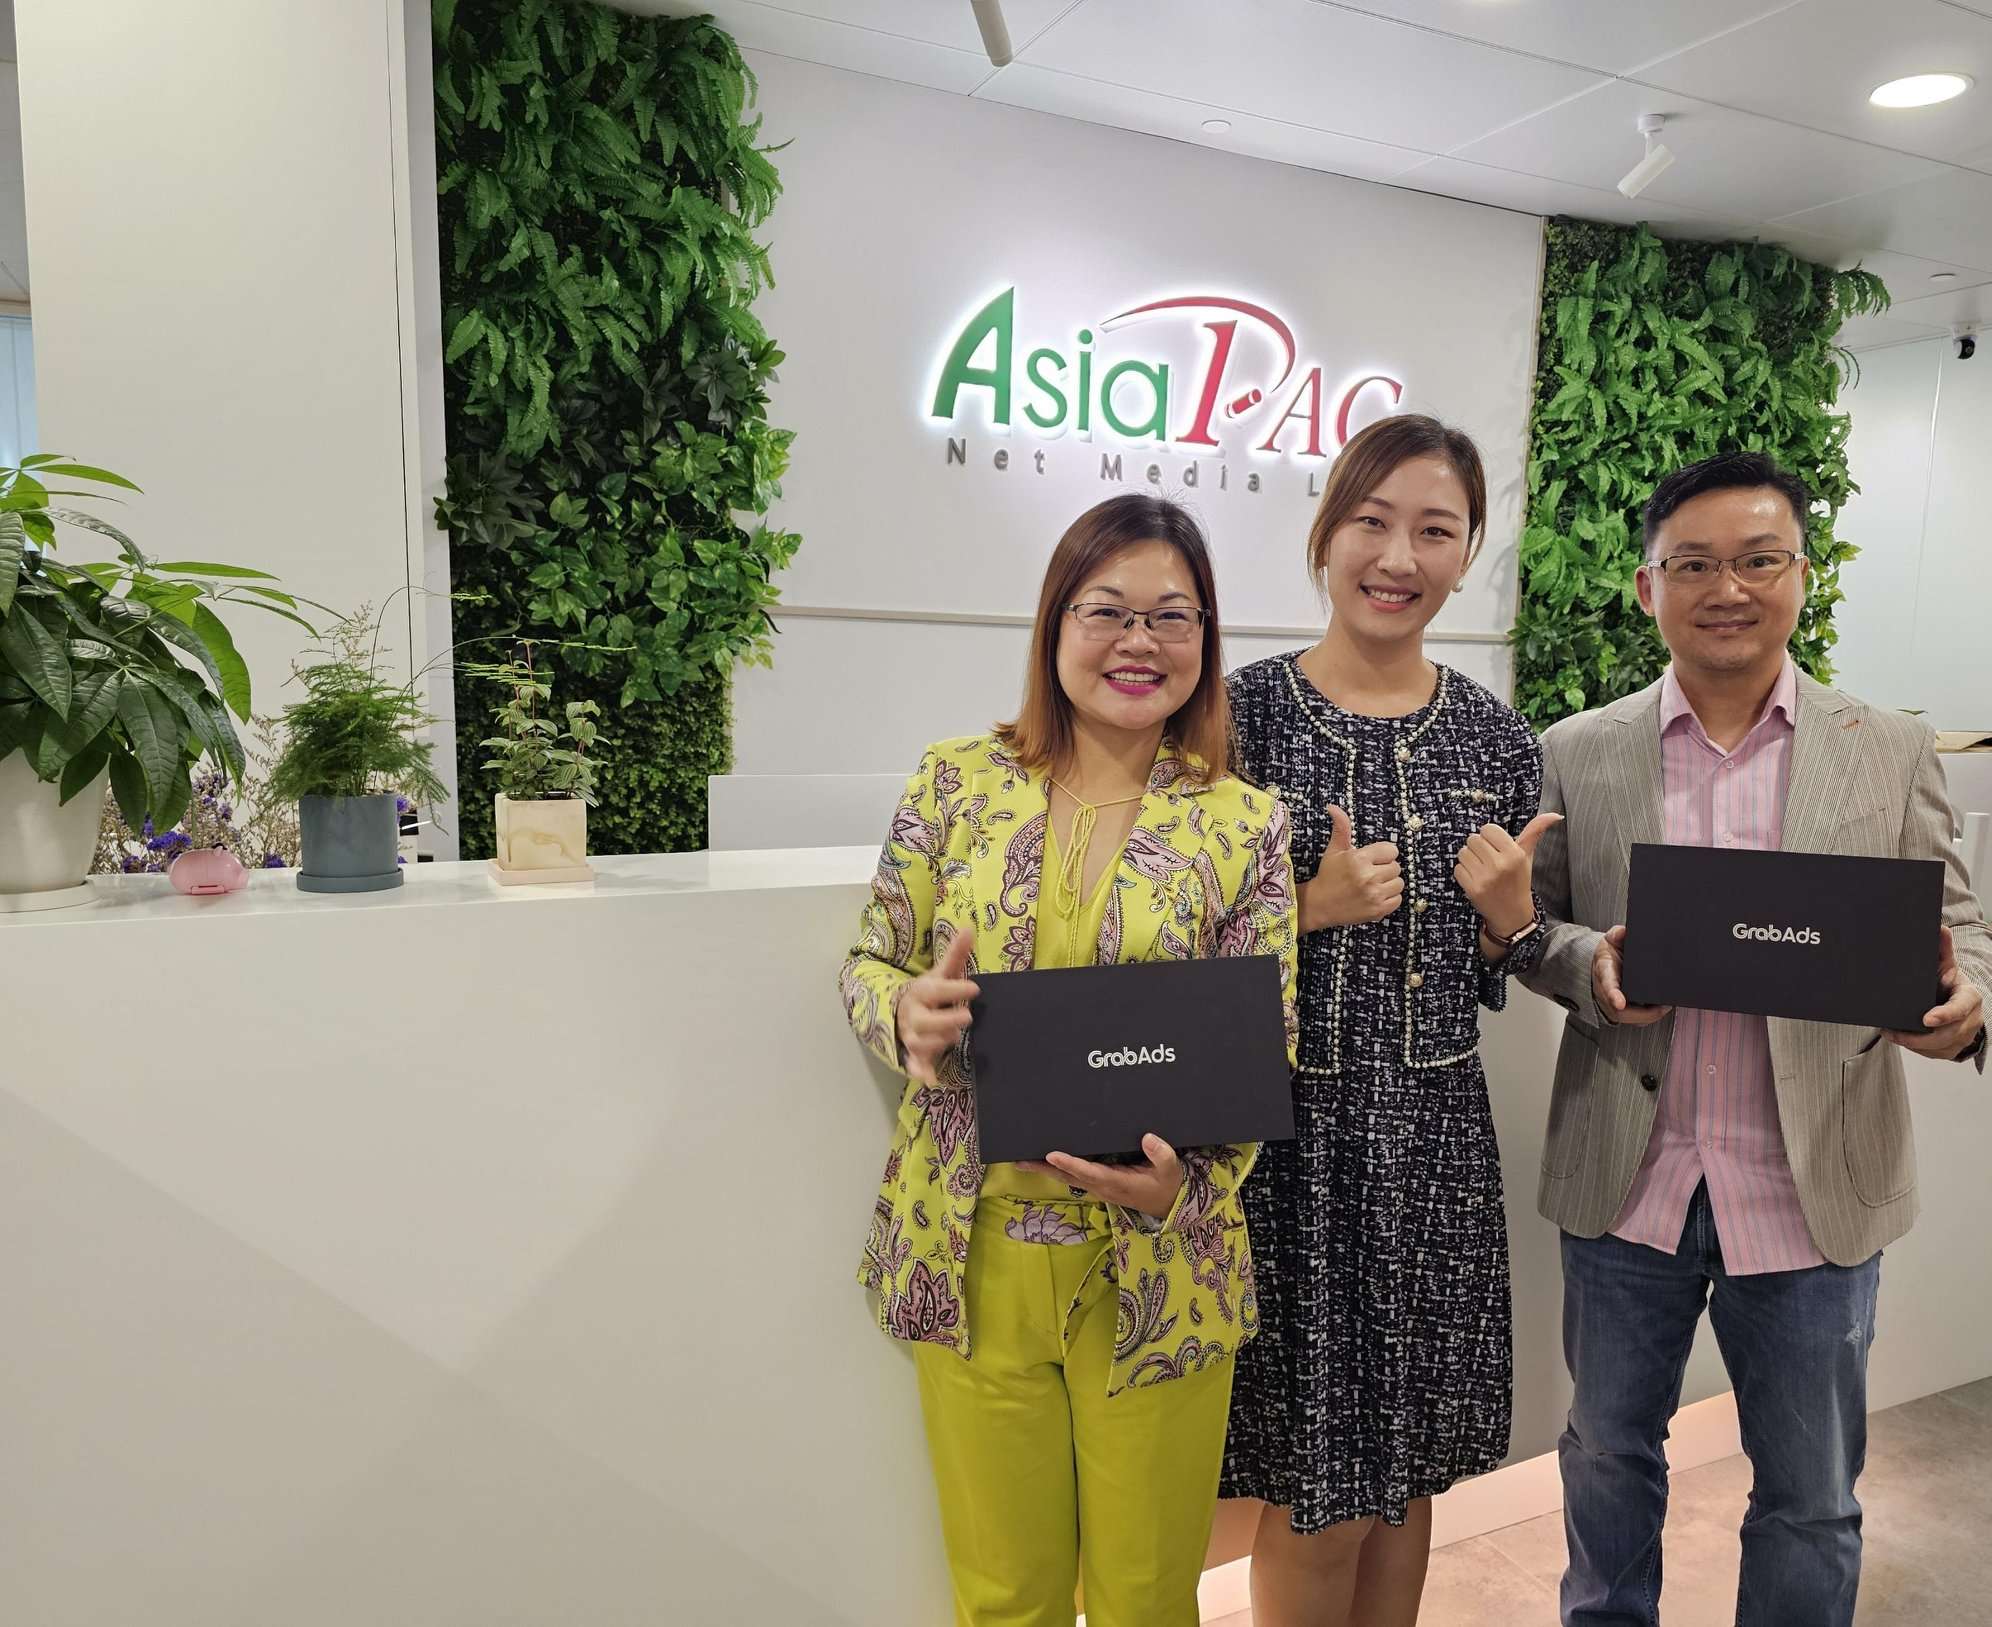 AsiaPac-Group-x-GrabAds-for-business-growth-in-SEA-01.JPEG